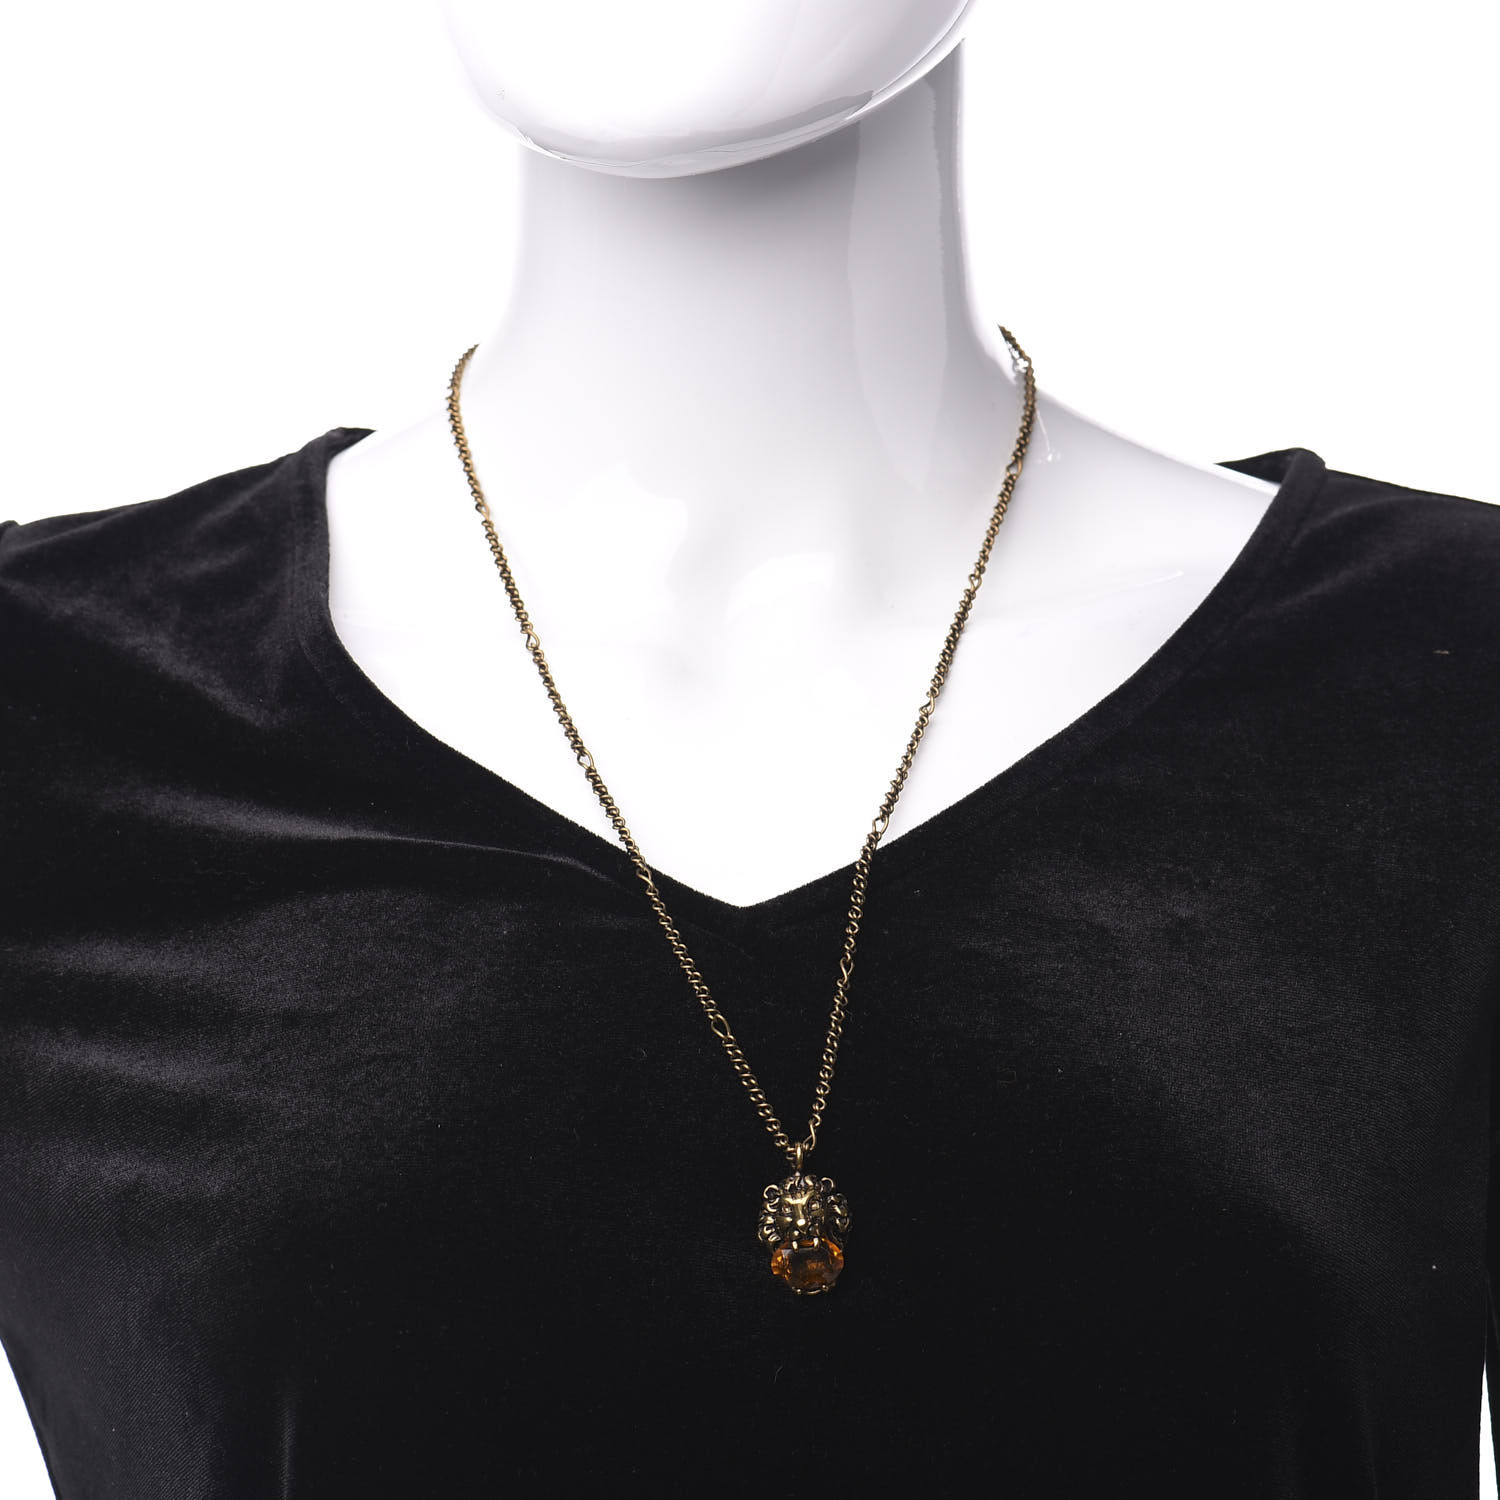 necklace with lion head pendant gucci